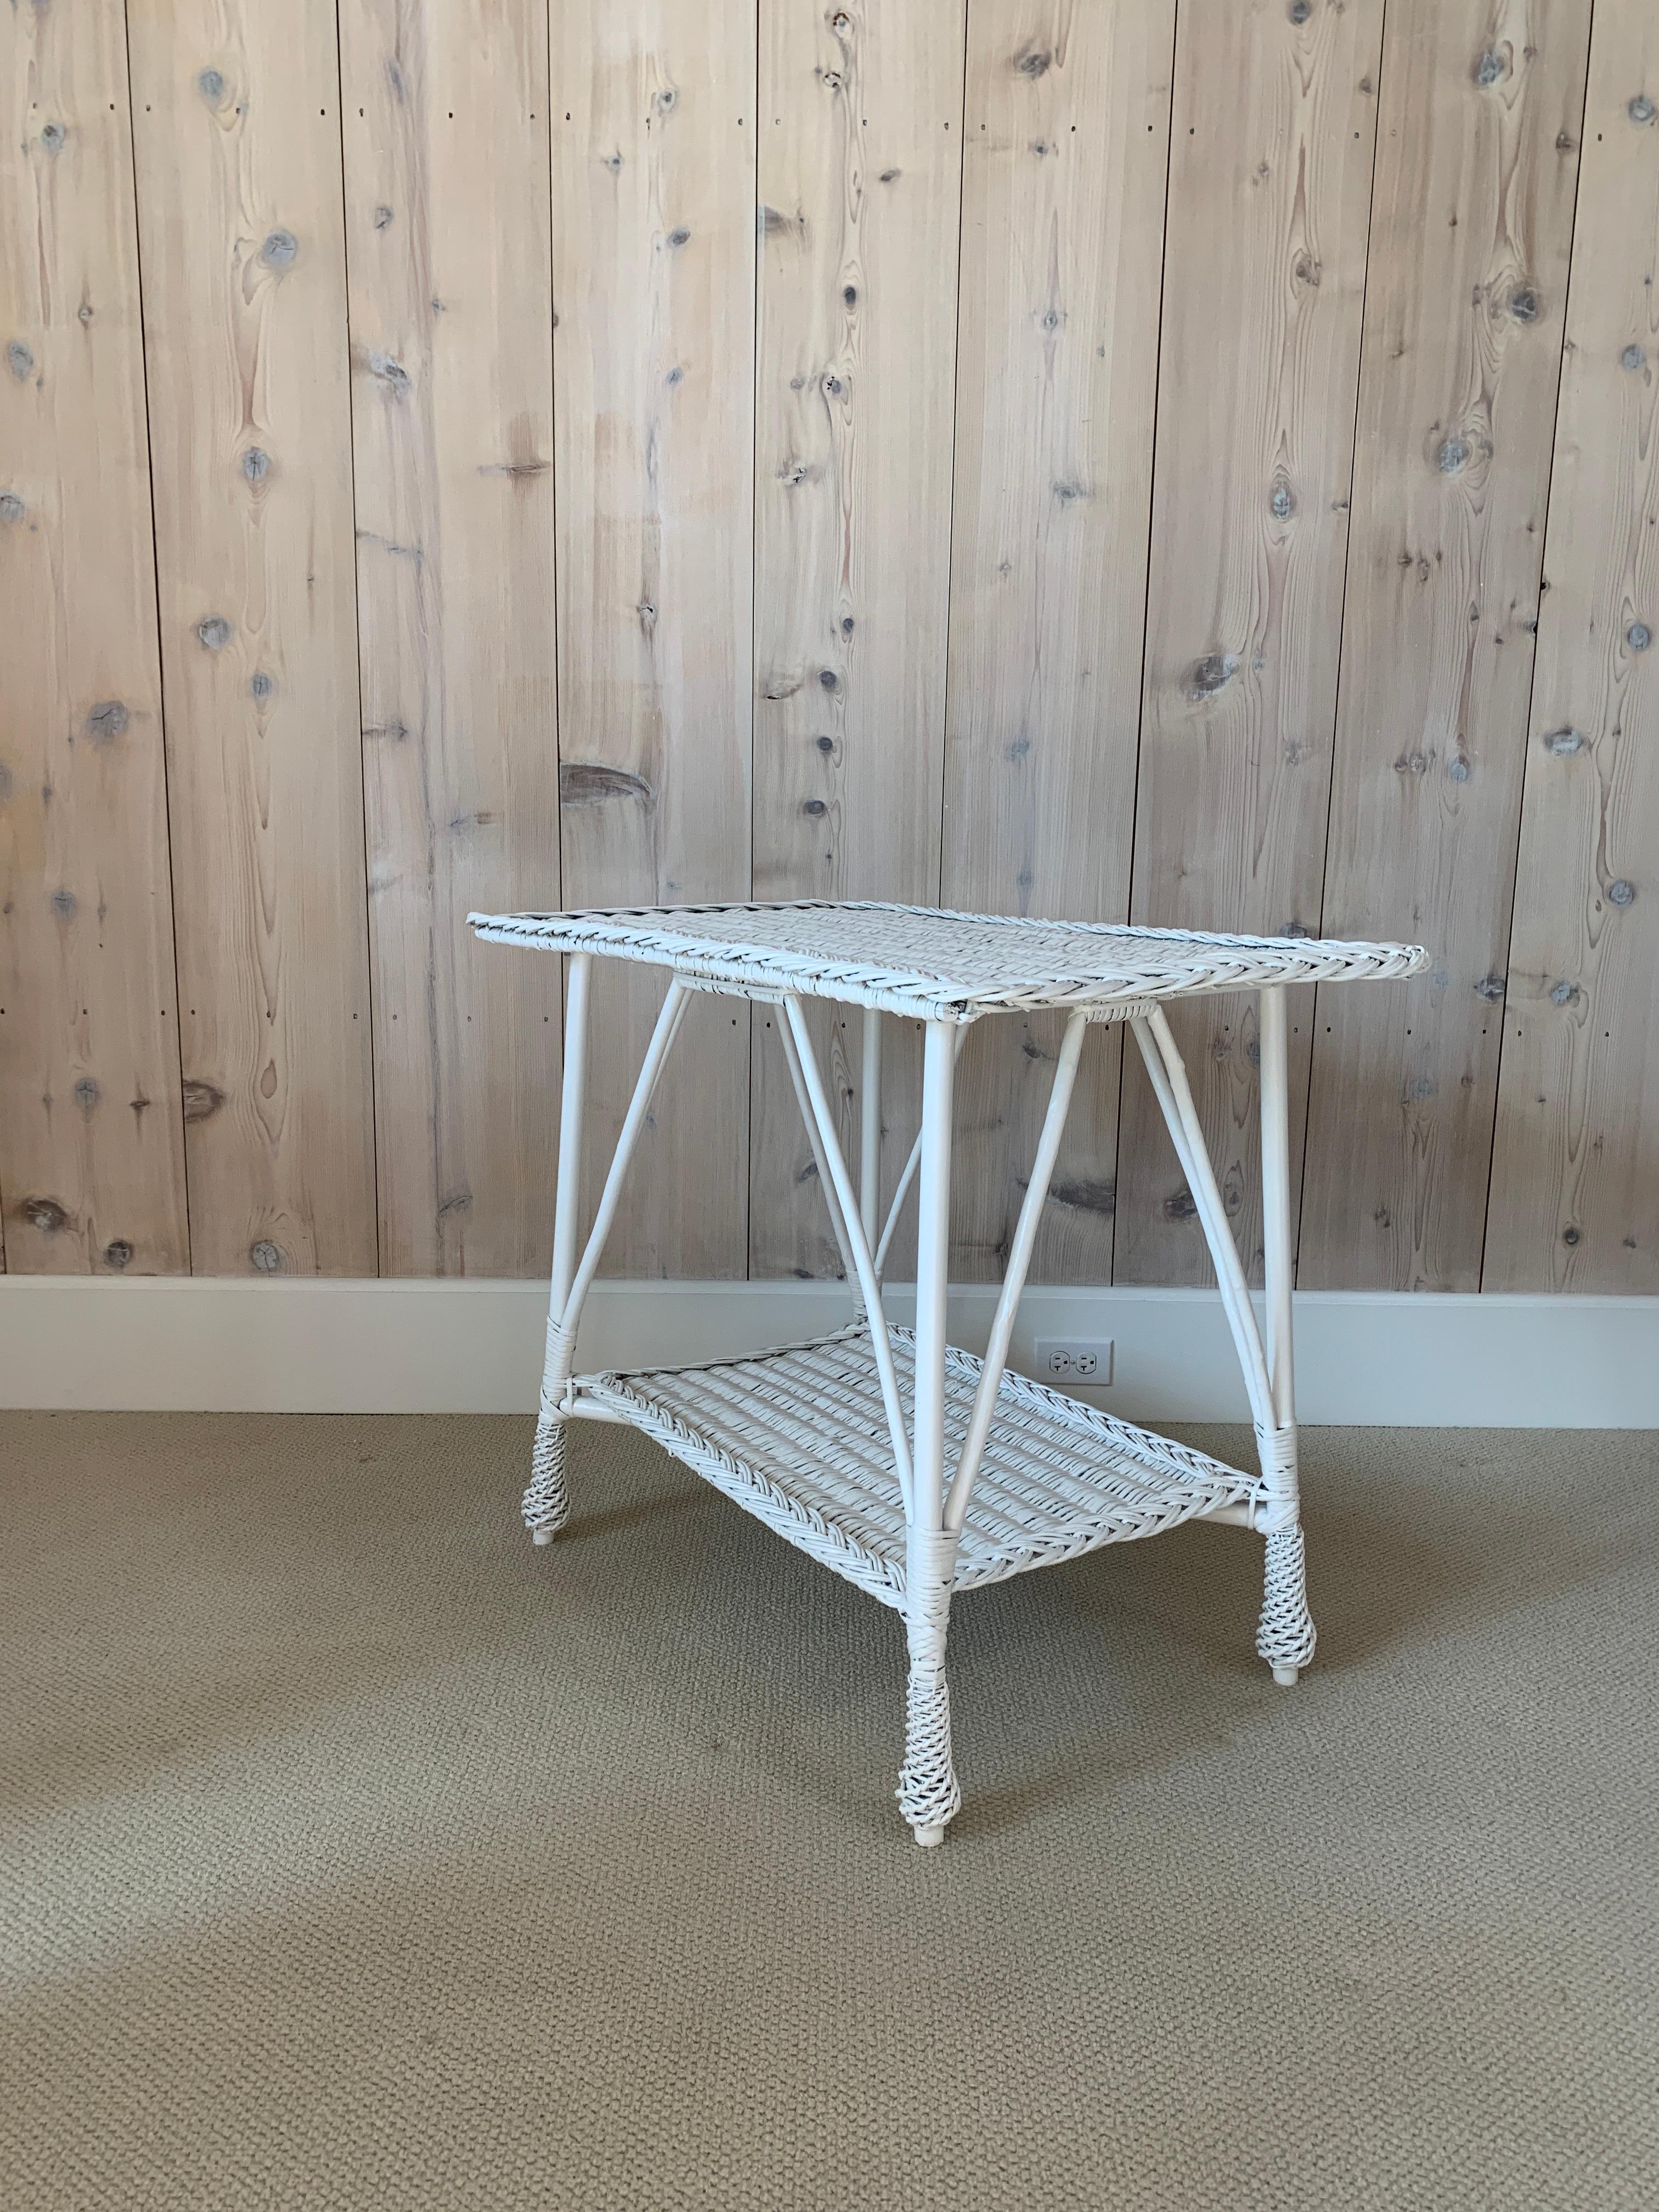 Hand-Woven Antique Wicker Table For Sale